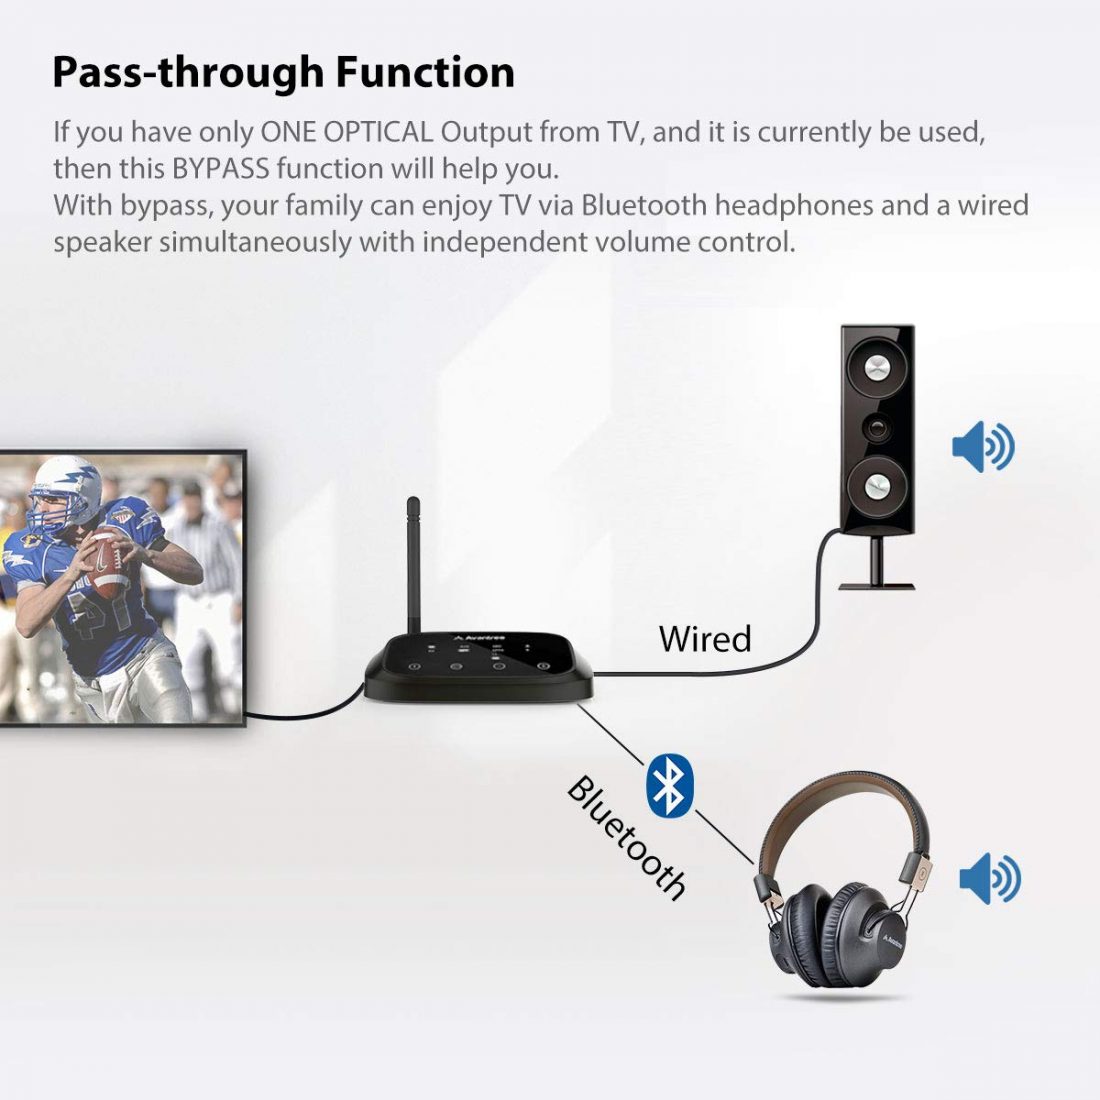 how do i connect a bluetooth headset to my ps4